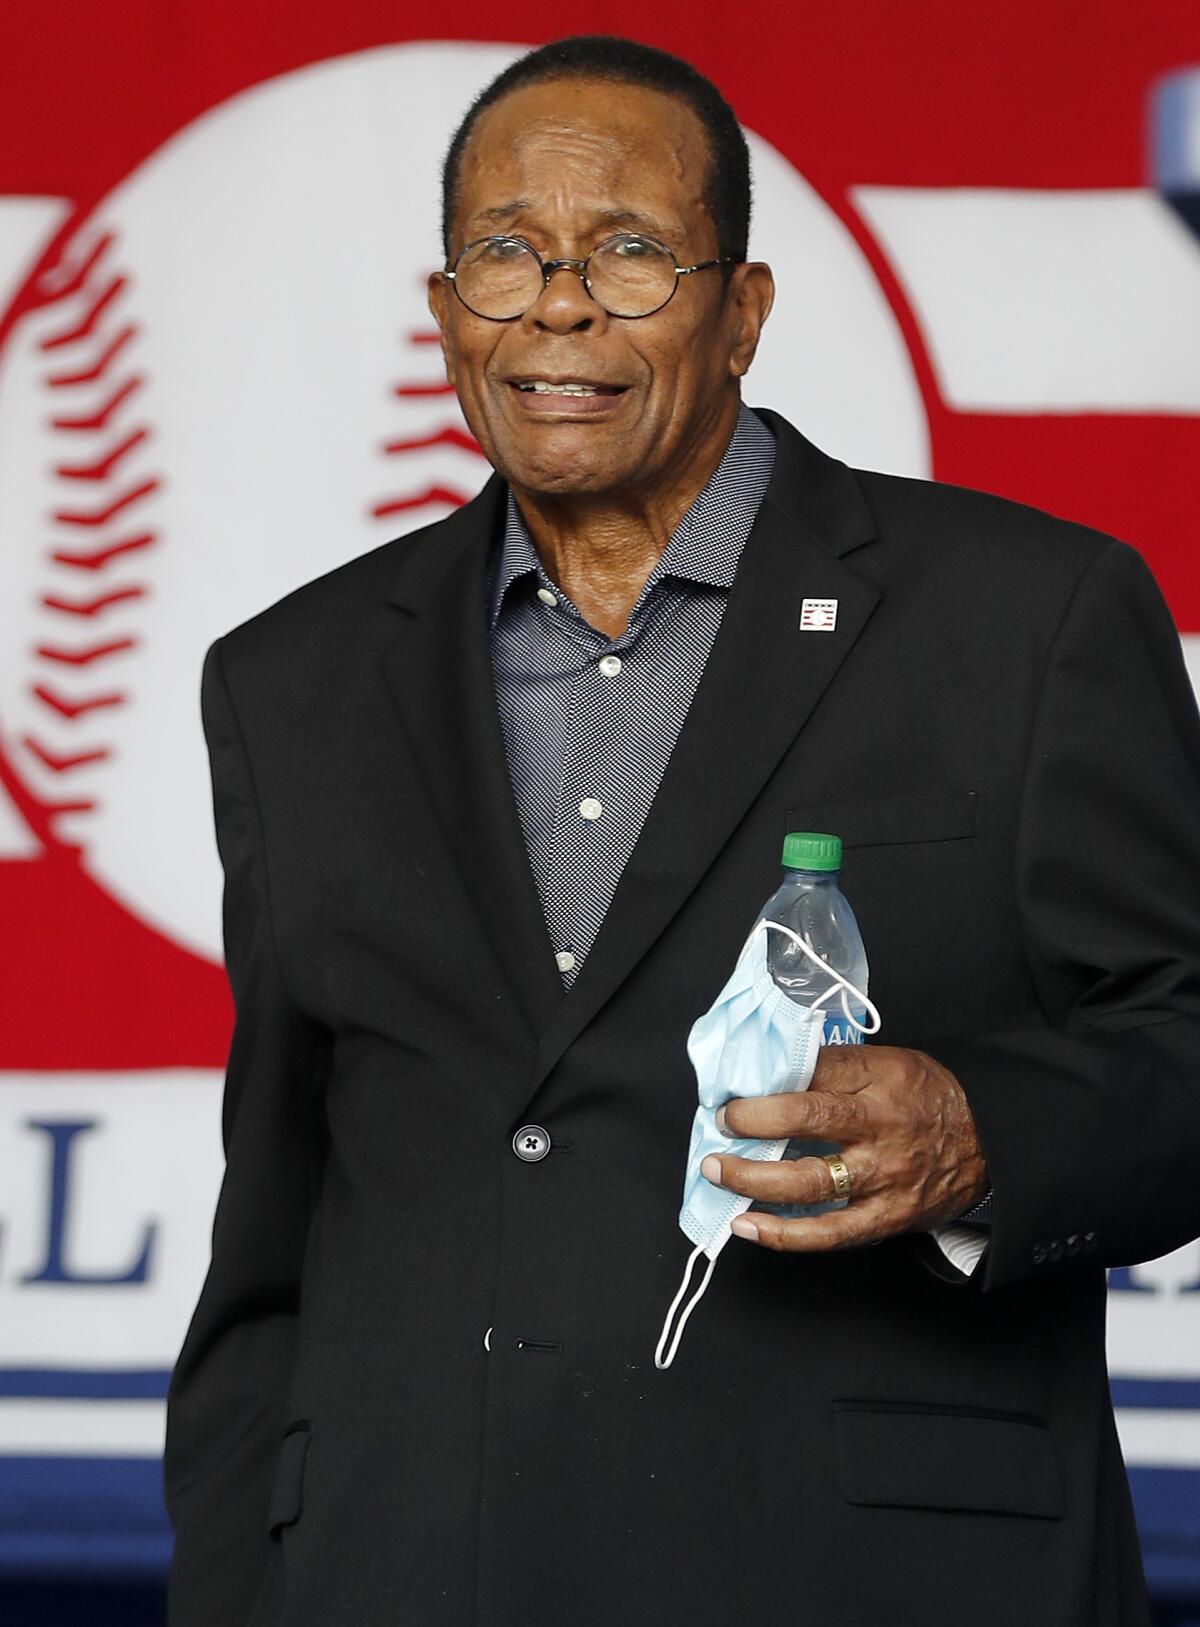 Hall of Famer Rod Carew is introduced during the Baseball Hall of Fame induction ceremony in 2021 in Cooperstown, New York.